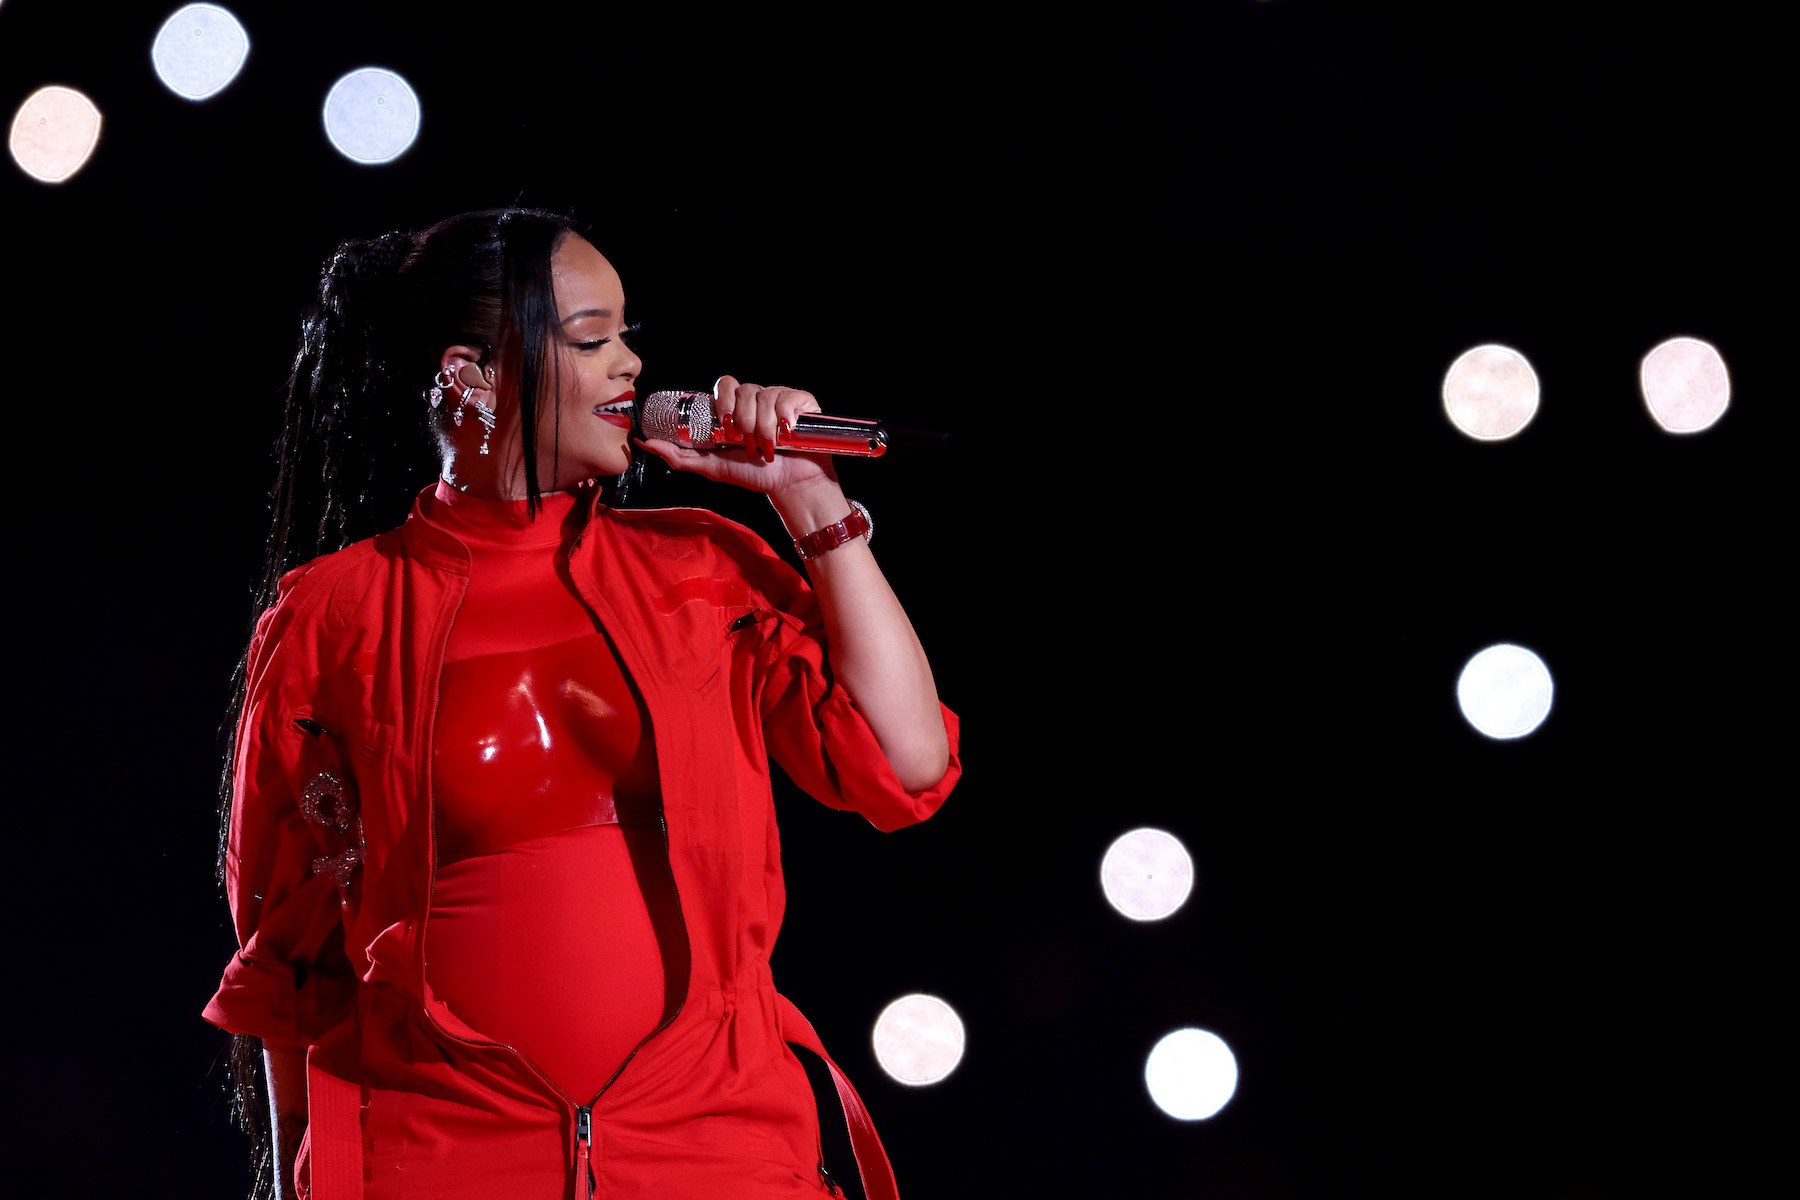 Rihanna performing her hits at the Super Bowl halftime show